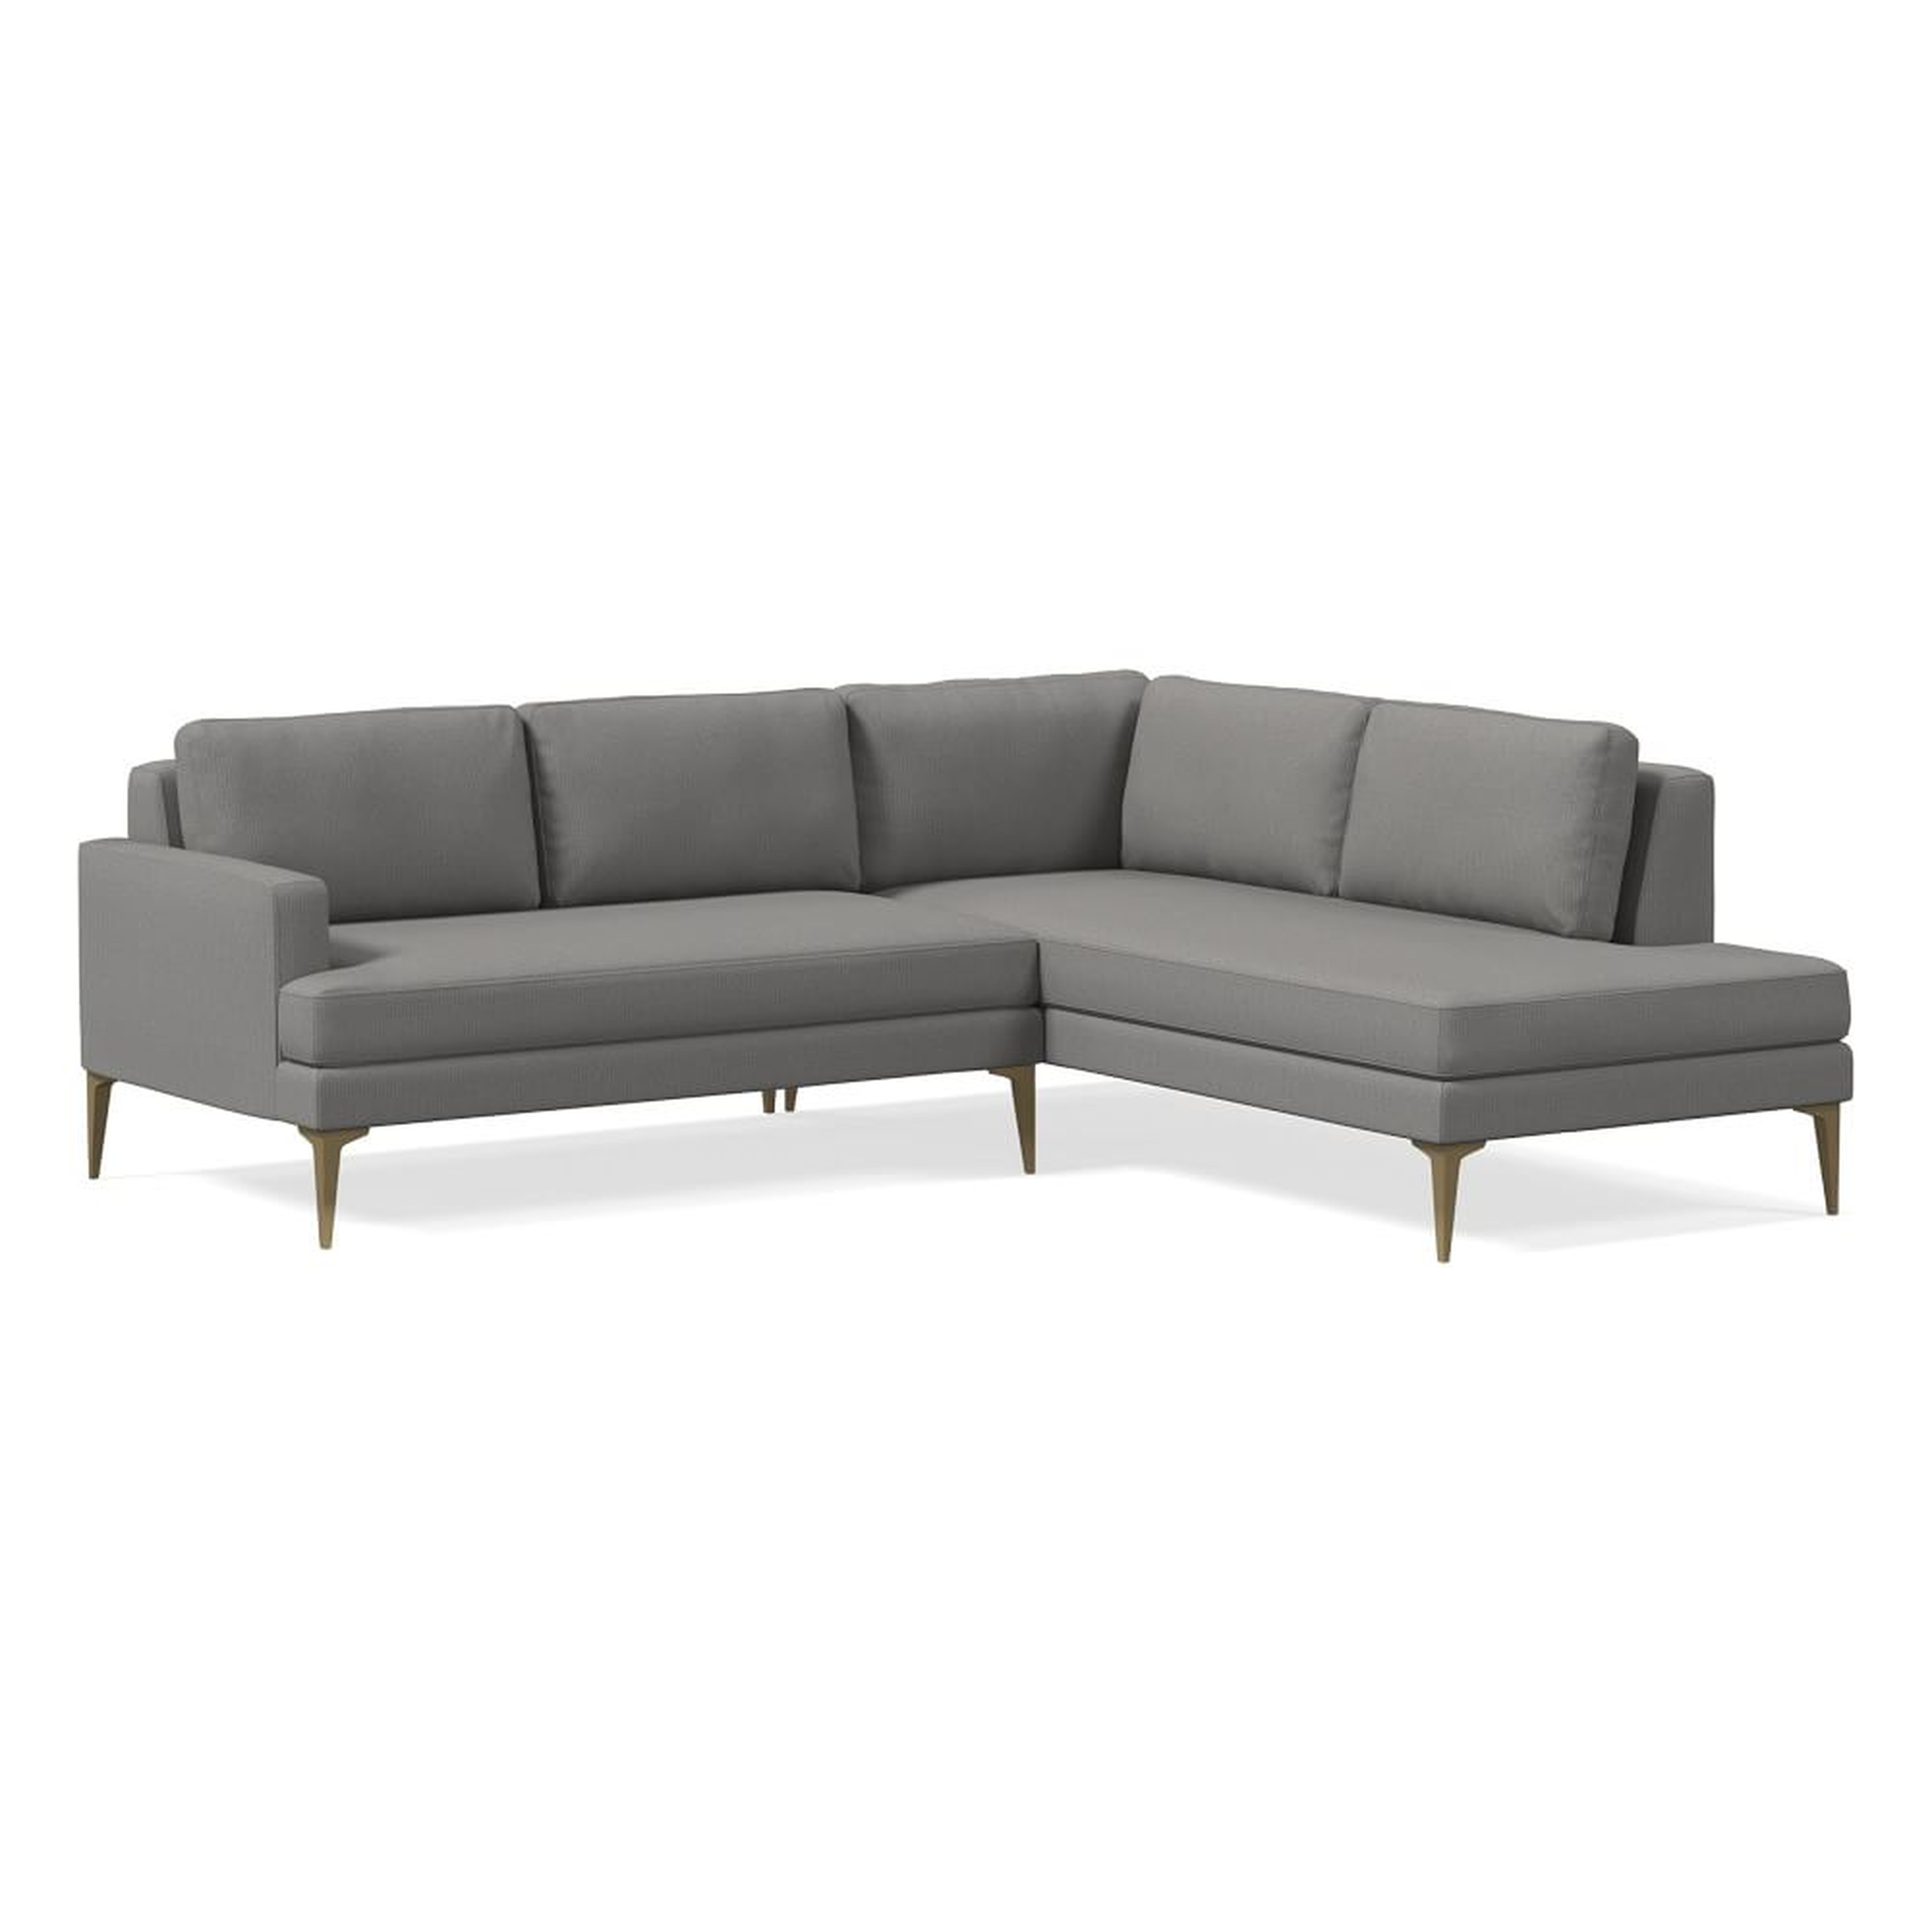 Andes 90" Right Multi Seat 2-Piece Bumper Chaise Sectional, Petite Depth, Performance Washed Canvas, Storm Gray, BB - West Elm